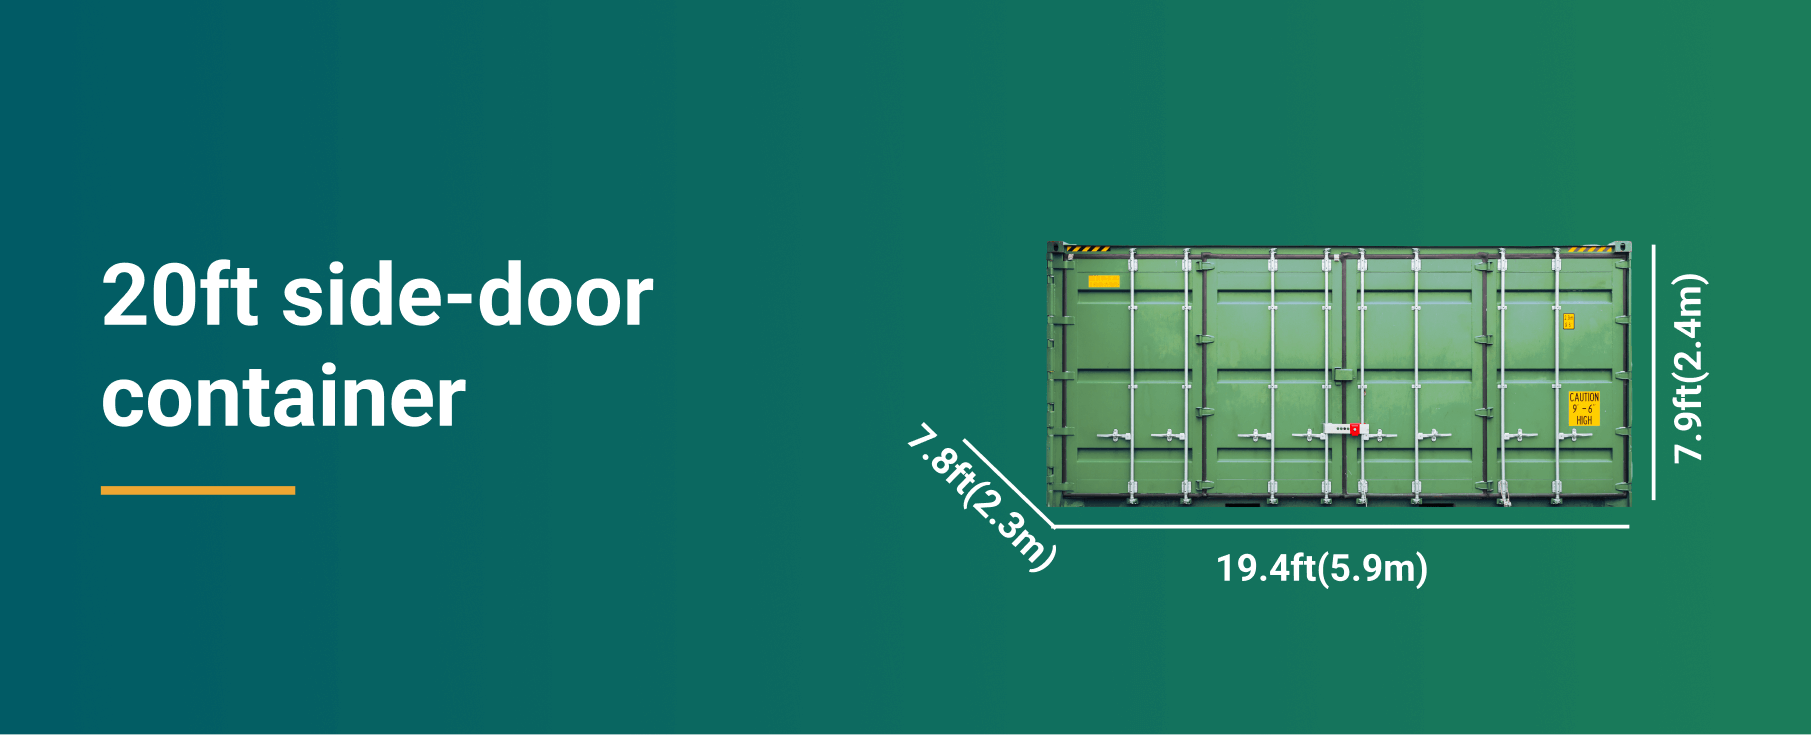 sidedoor container dimensions